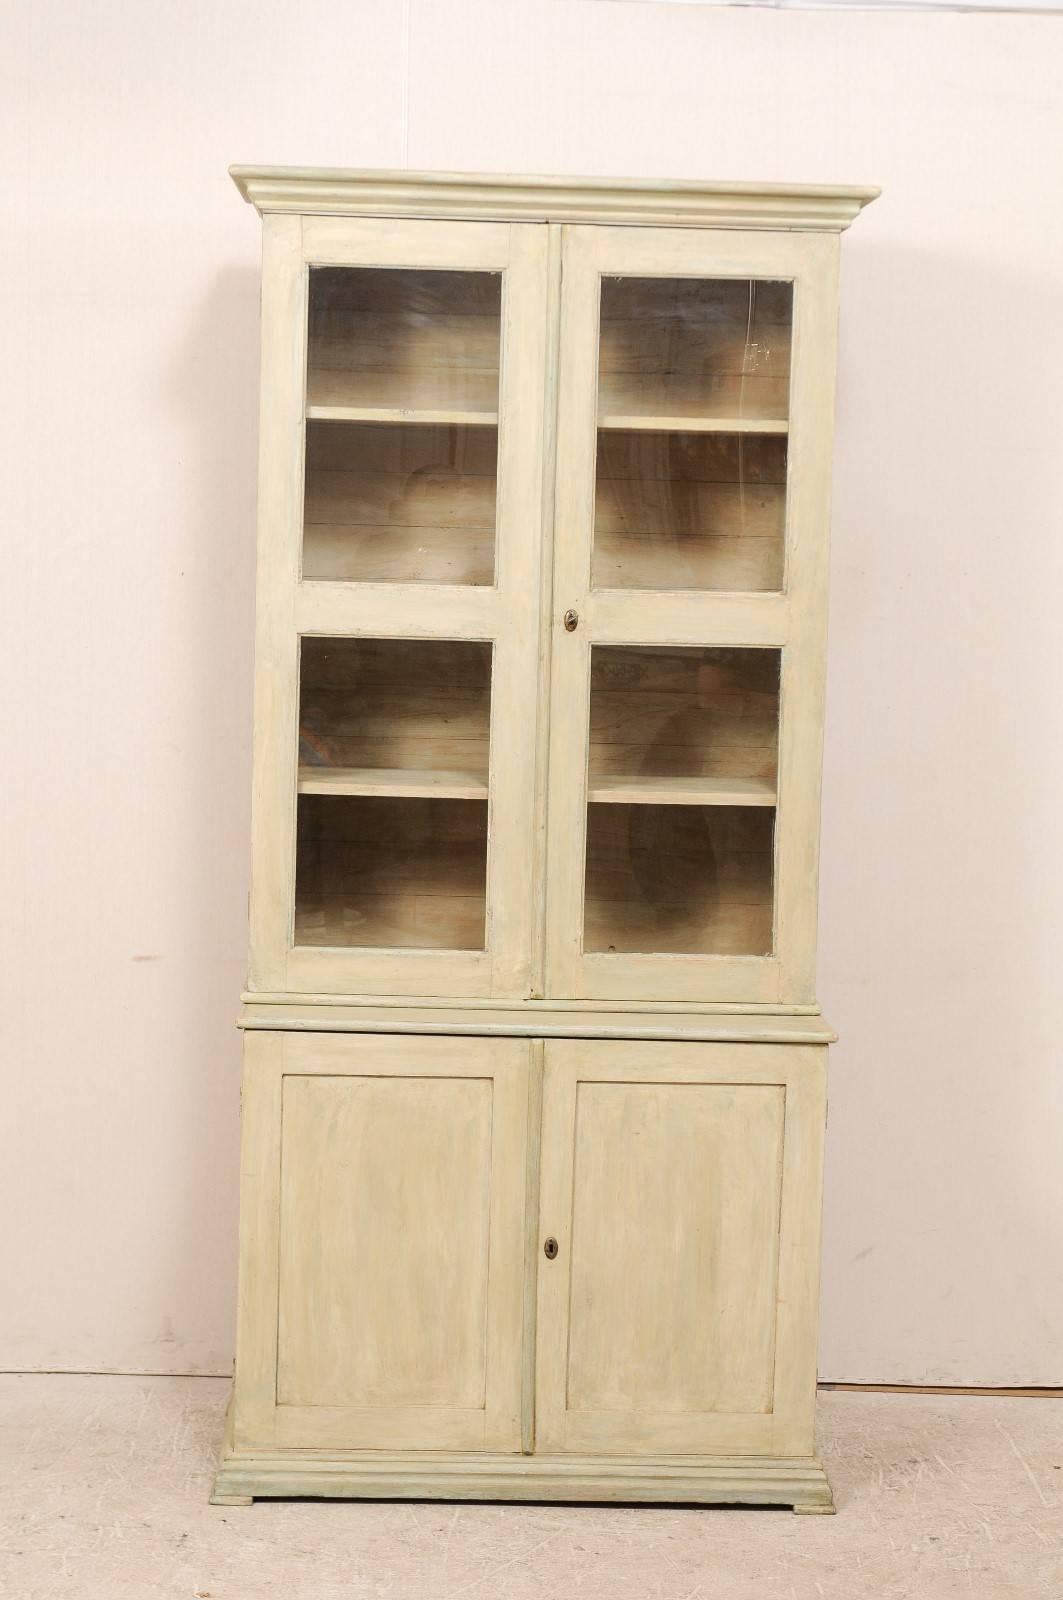 A 19th century Swedish painted wood bookcase and cabinet. This Swedish cabinet, circa 1830-1840, features two glass doors in the upper section over two enclosed bottom doors in the lower cabinet. There are interior shelves within the upper and lower